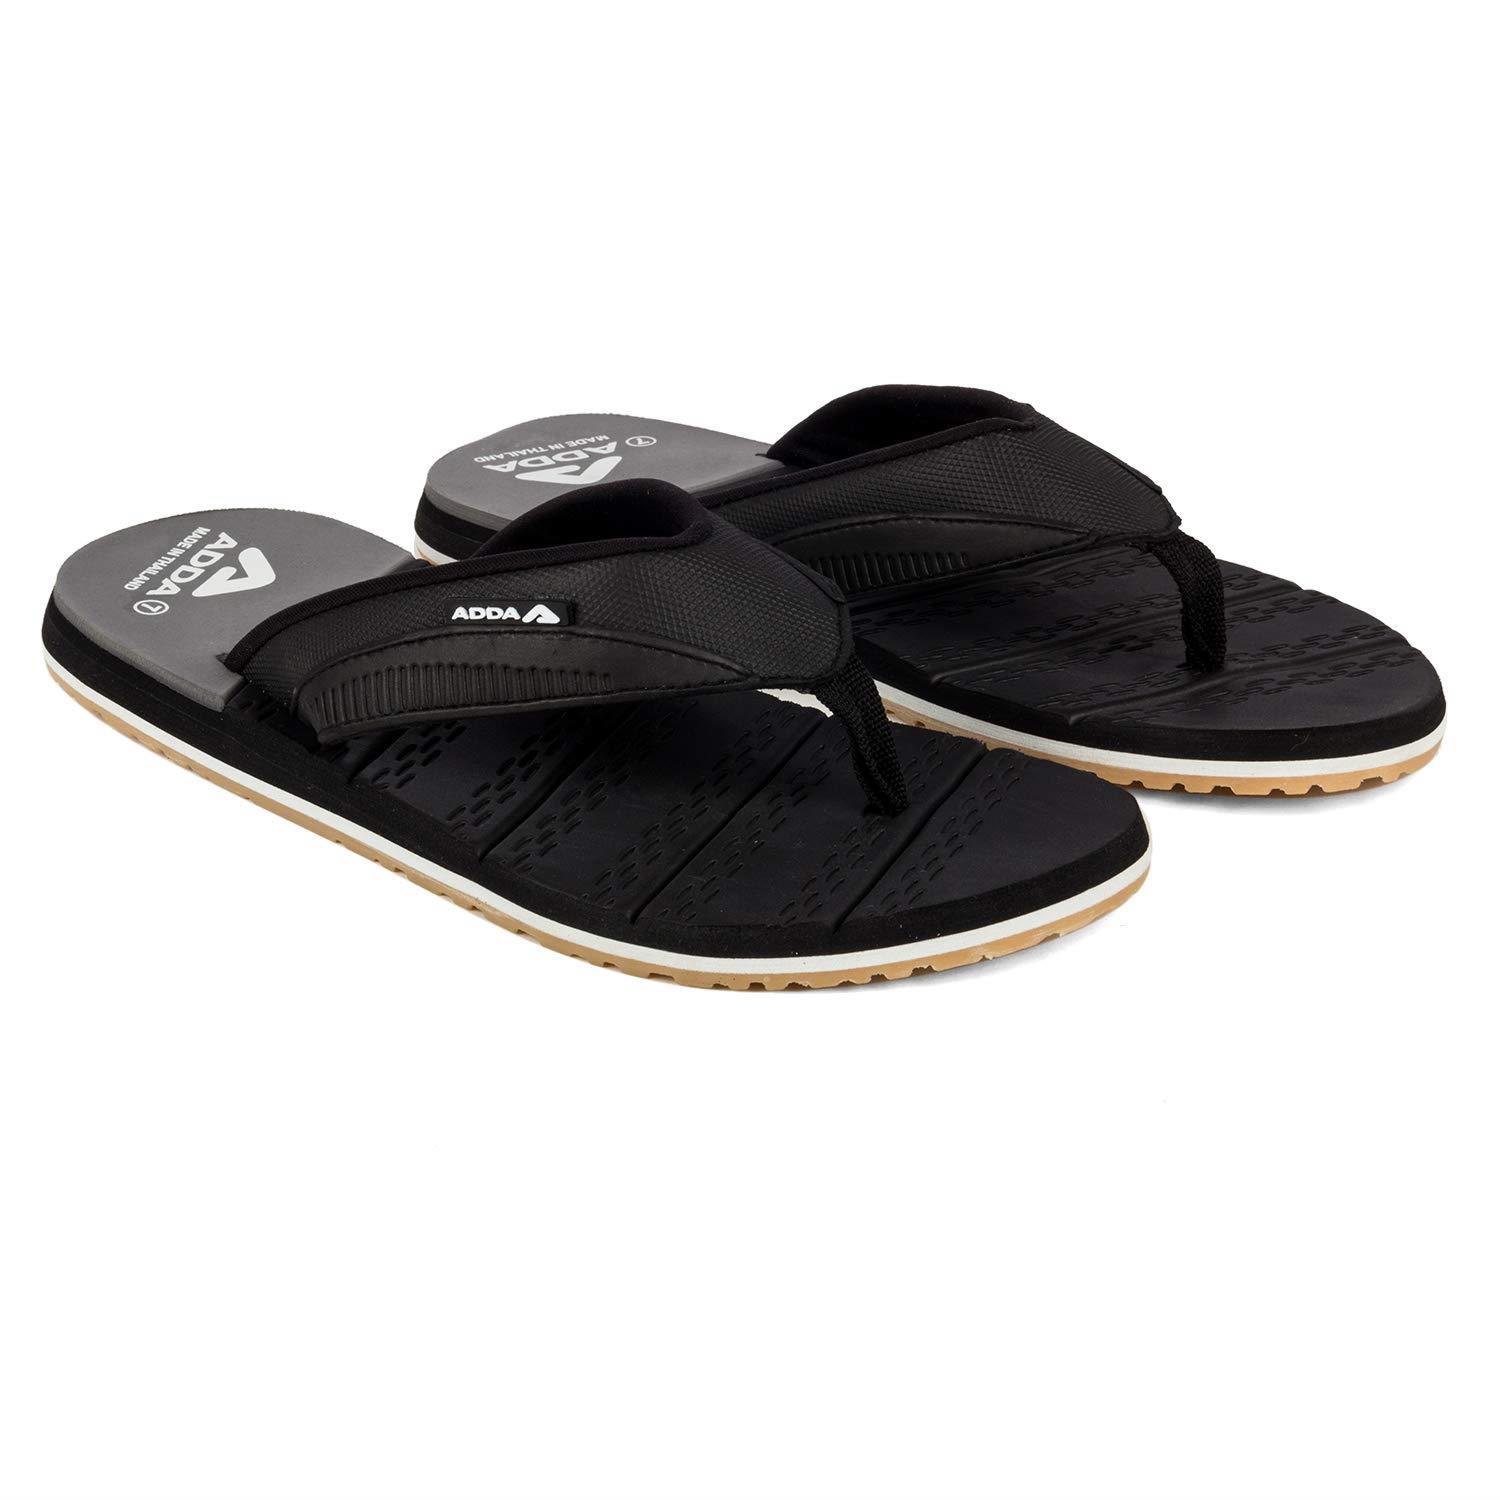 After 6 month using -- ADDA Men's Black Slipper Flip Flop detail review and  test. - YouTube